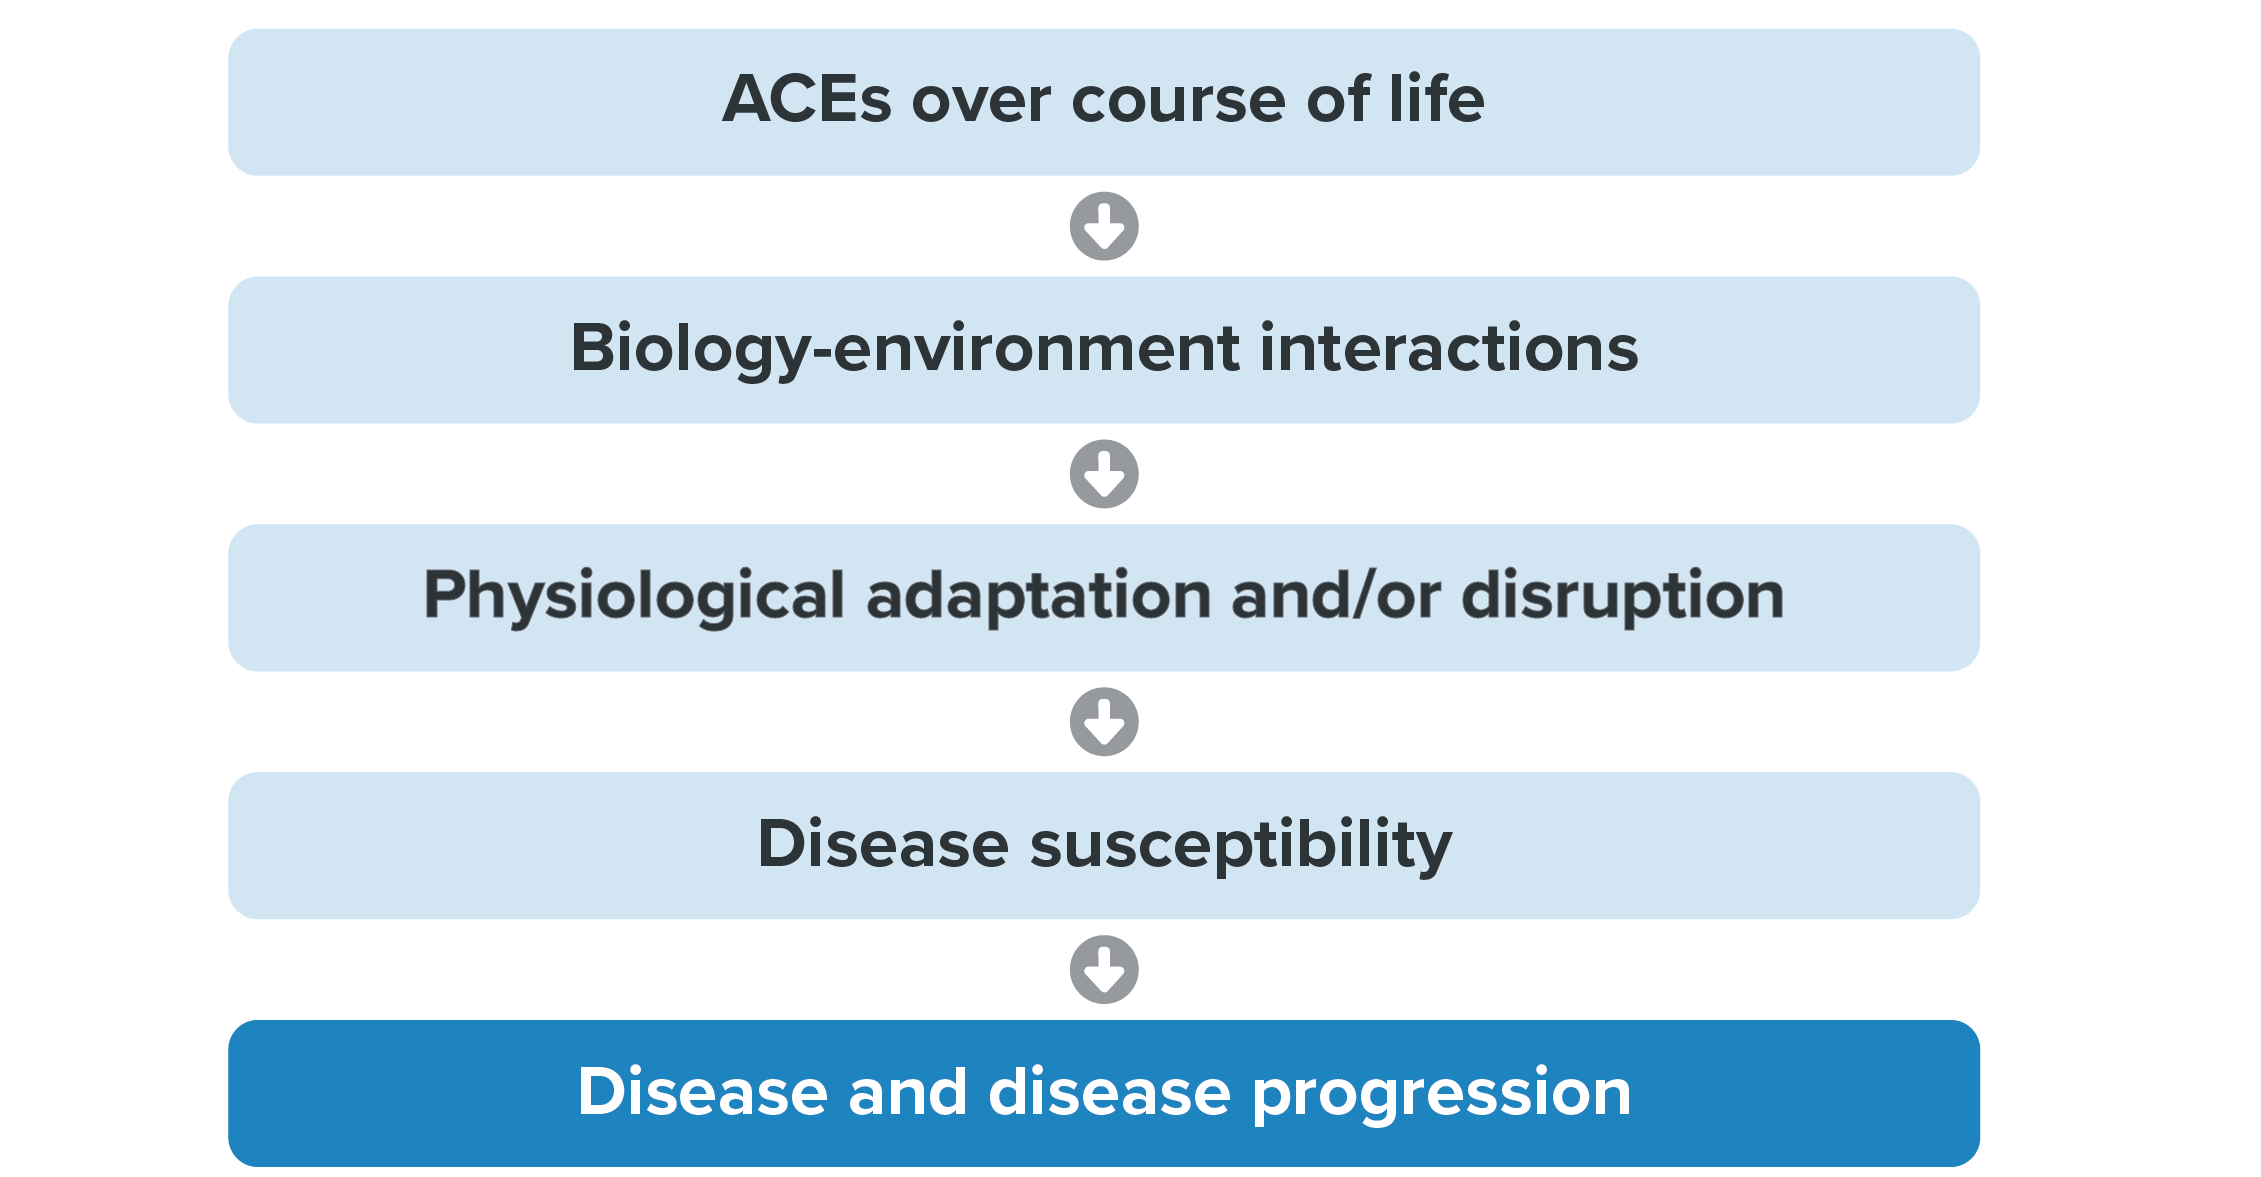 Steps from top to bottom: ACEs over the life course, biology environment interactions, physiological adaptation and/or disruption, disease susceptibility. Final step: Disease and disease progression.